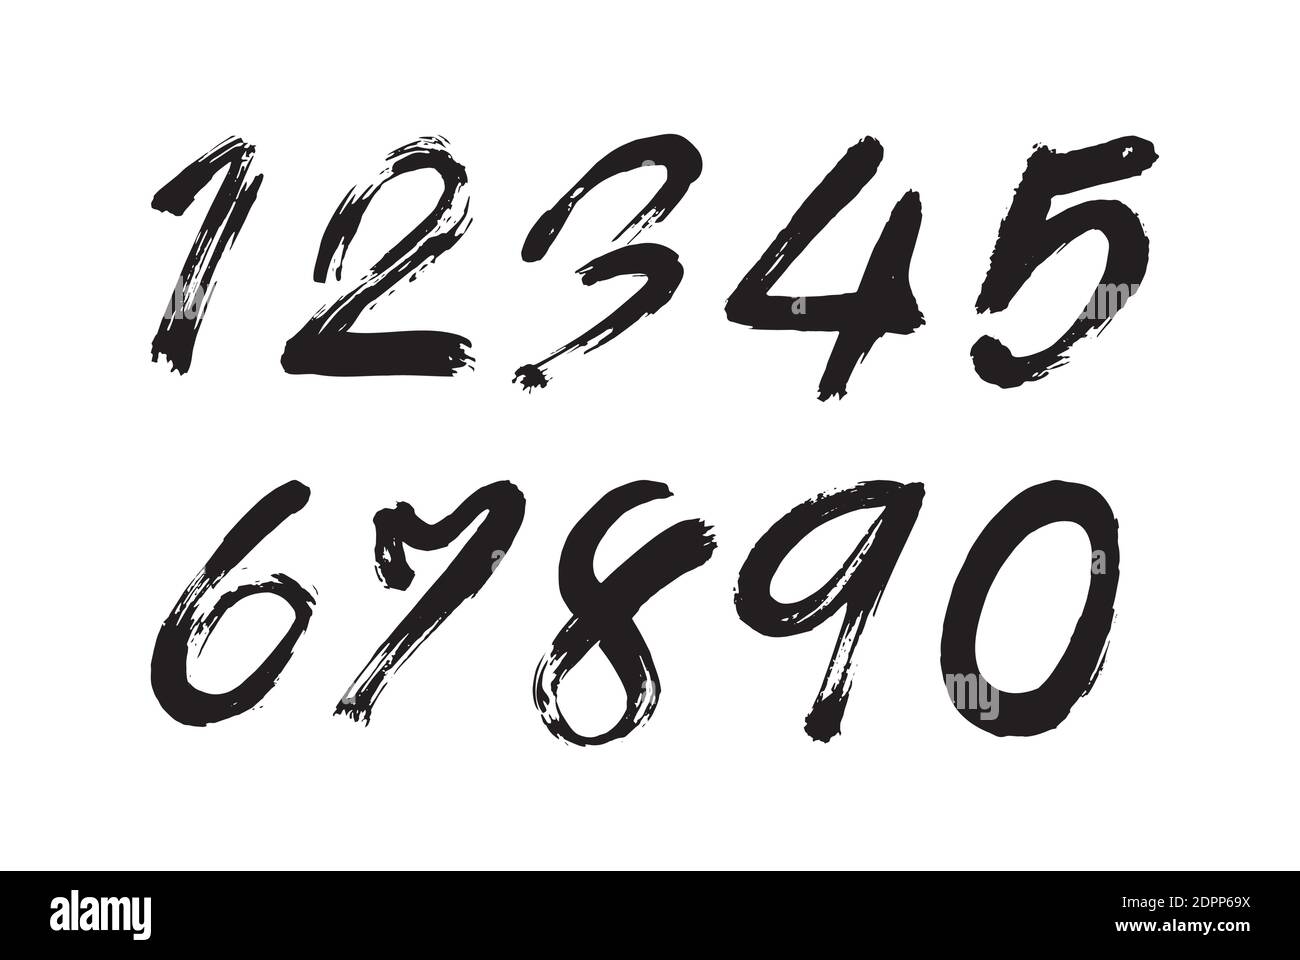 Numbers 0-9 written with a brush on a white background. Easy editable layered vector illustration. Stock Vector